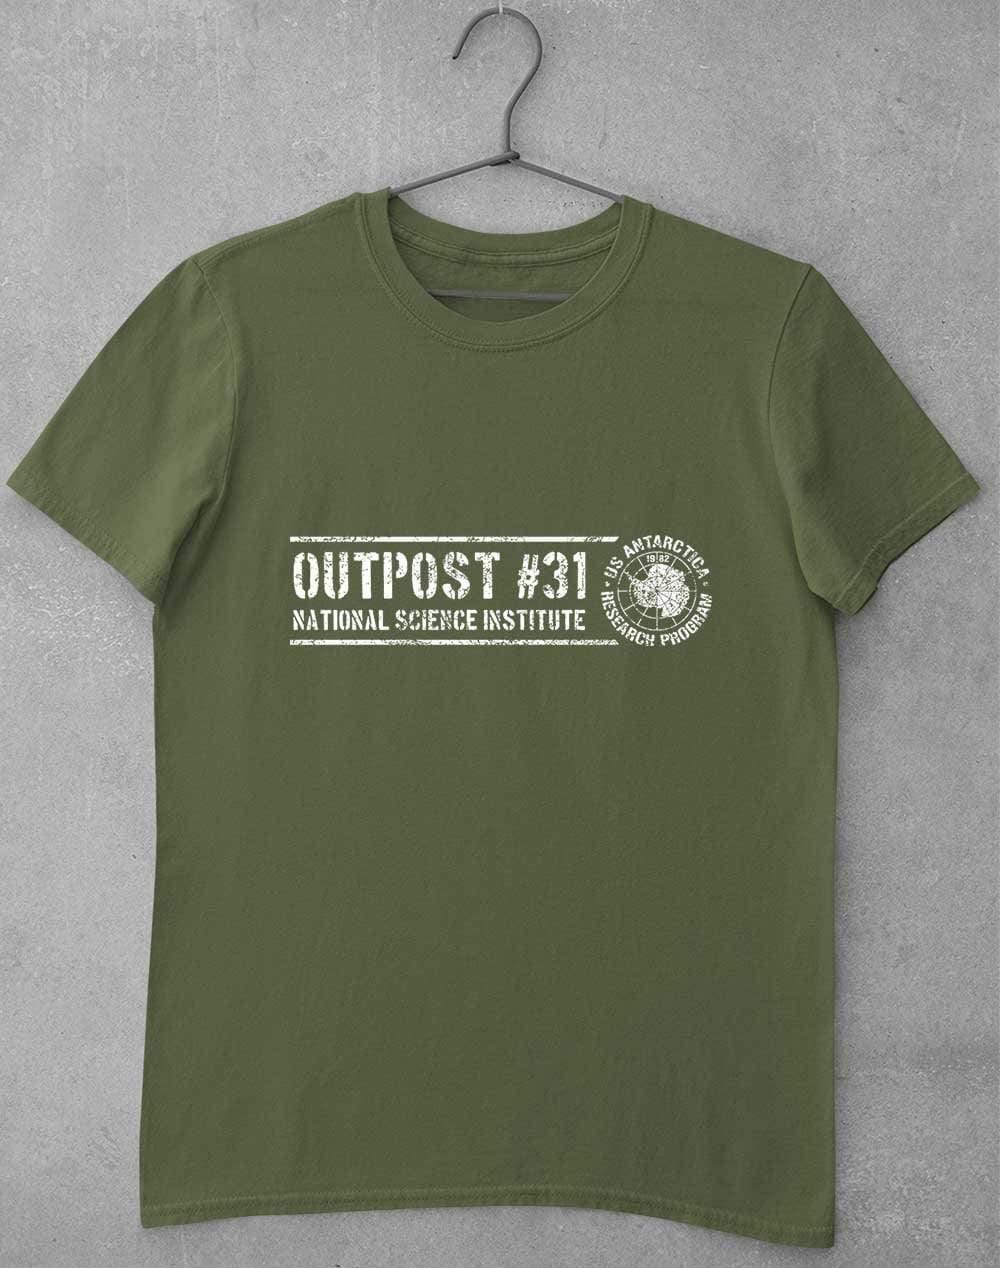 Outpost 31 Antarctica T-Shirt S / Military Green  - Off World Tees